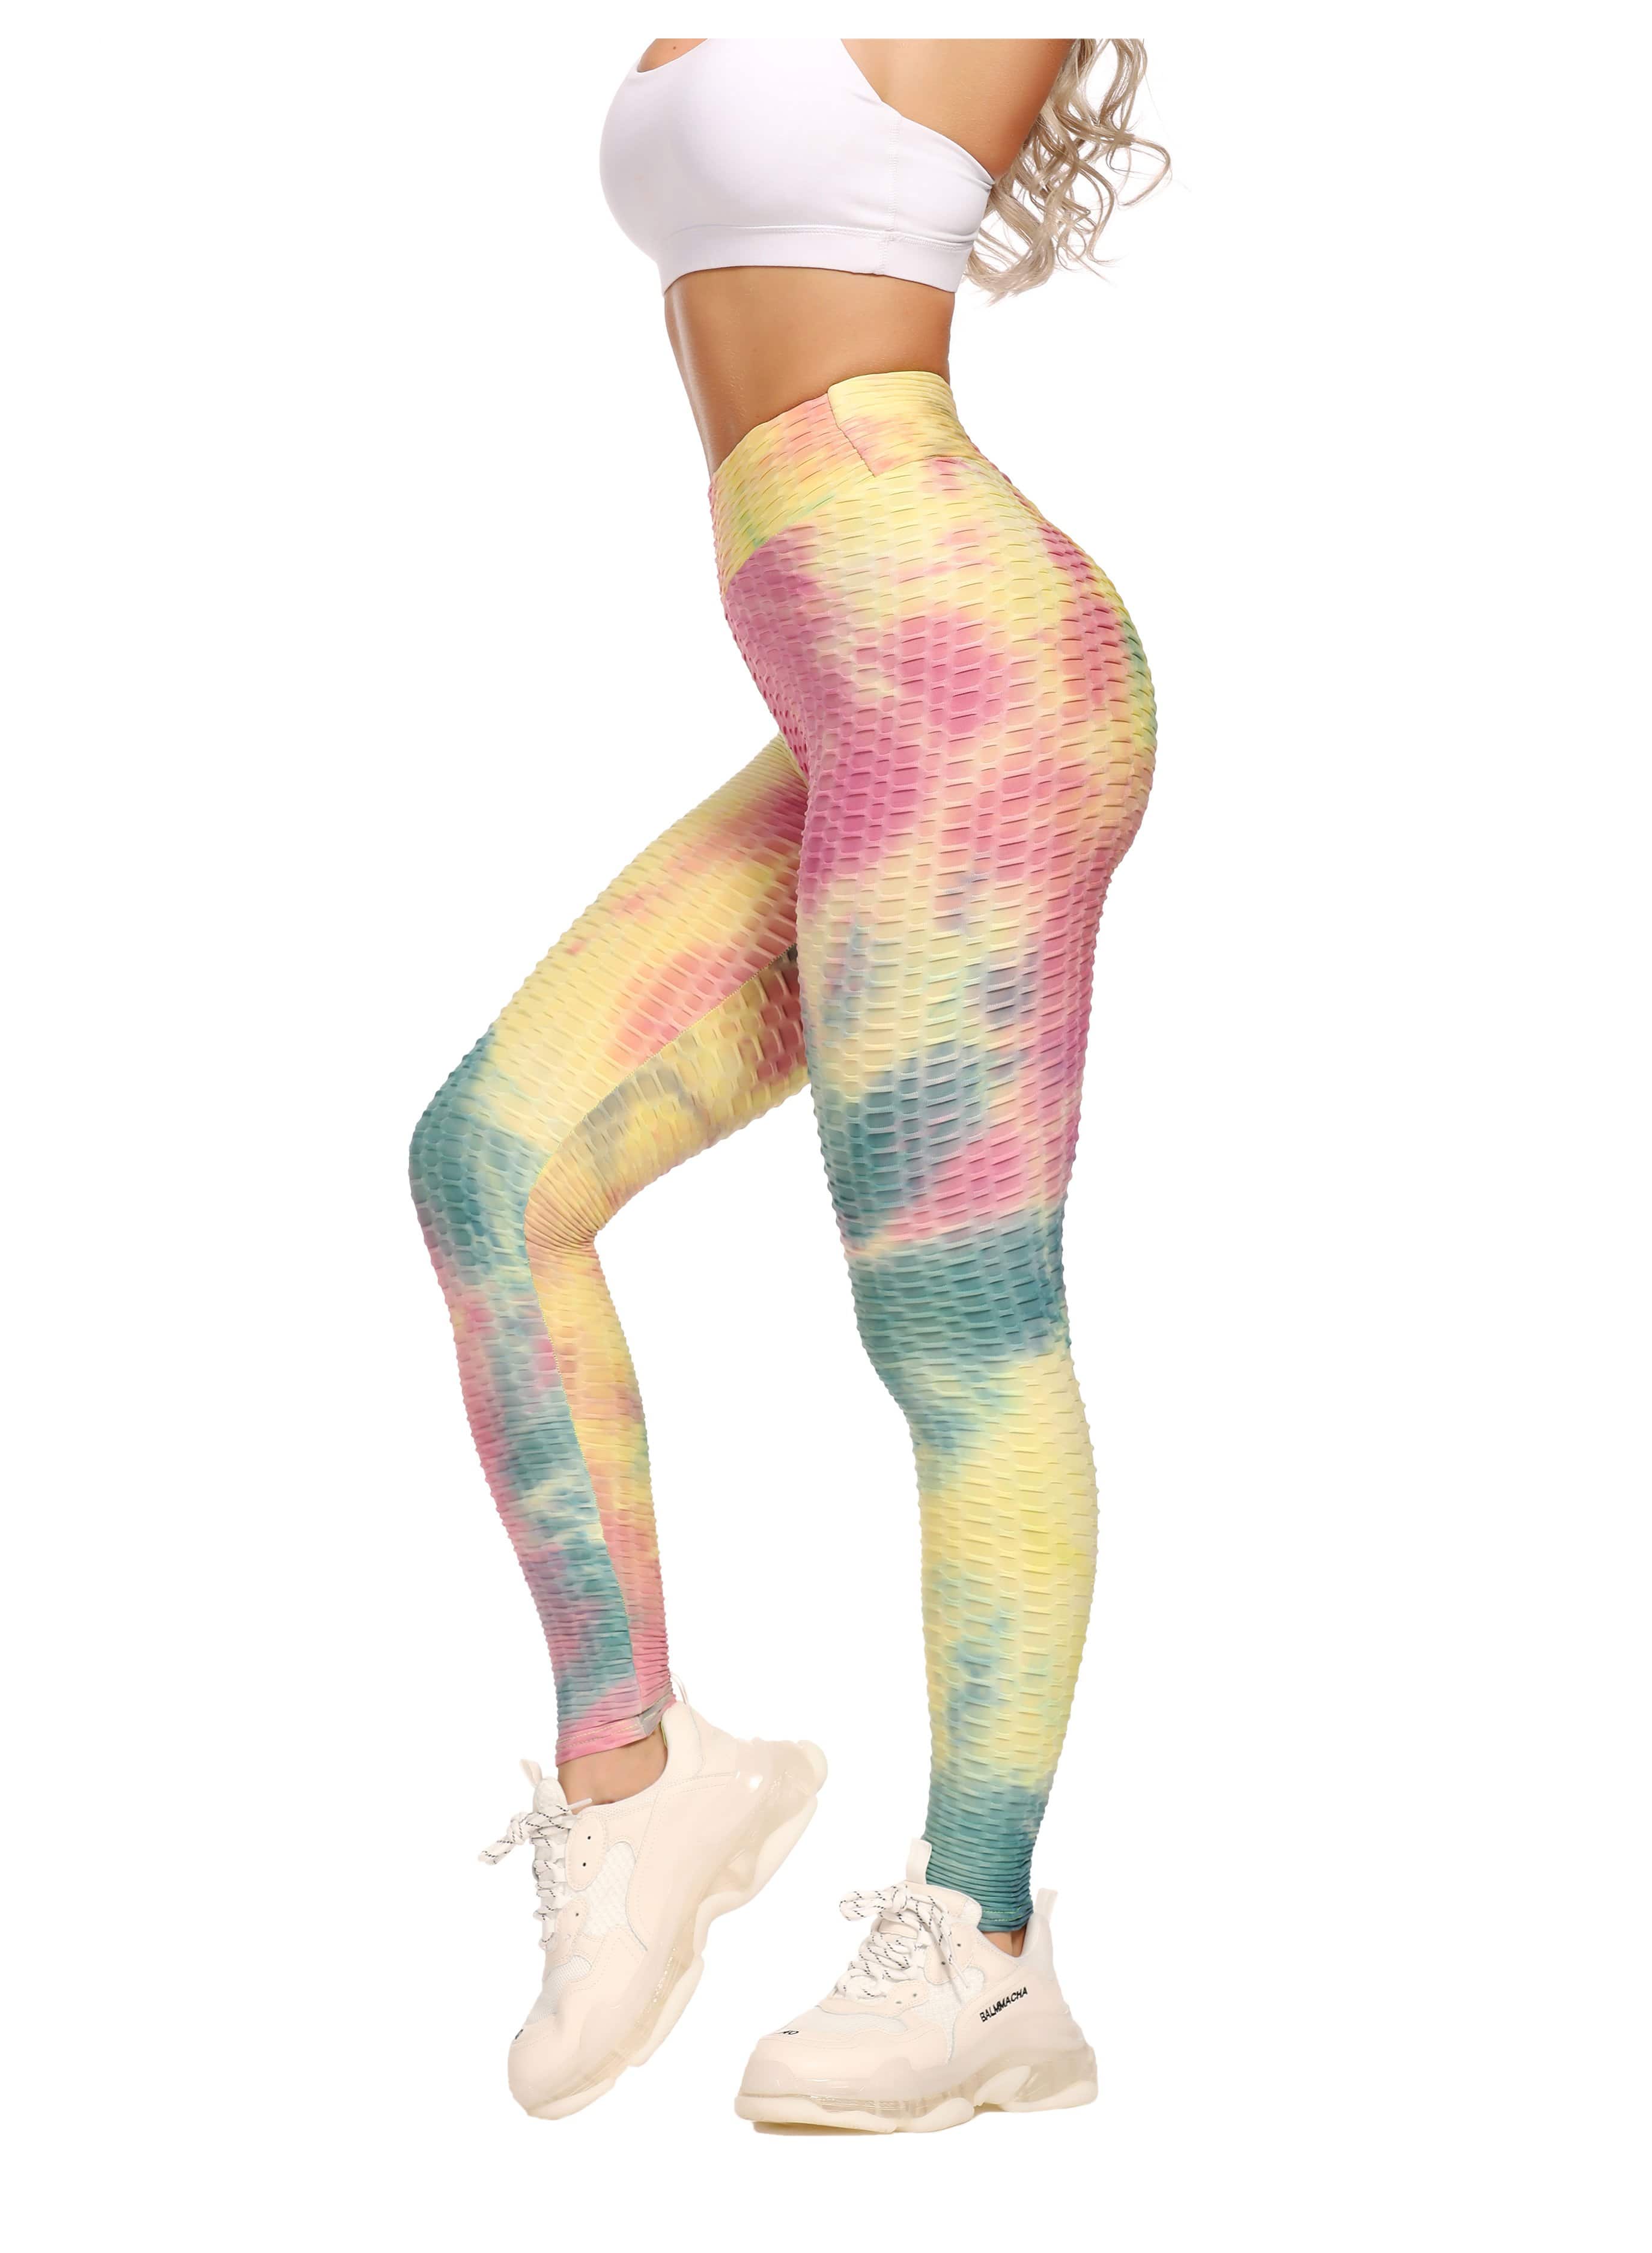 Multicolor Slim Fit Candy Color Cut Out Leggings With Elastic Waistband And  Side Cut Out For Women Perfect For Fitness And Trousers From Bestielady,  $3.81